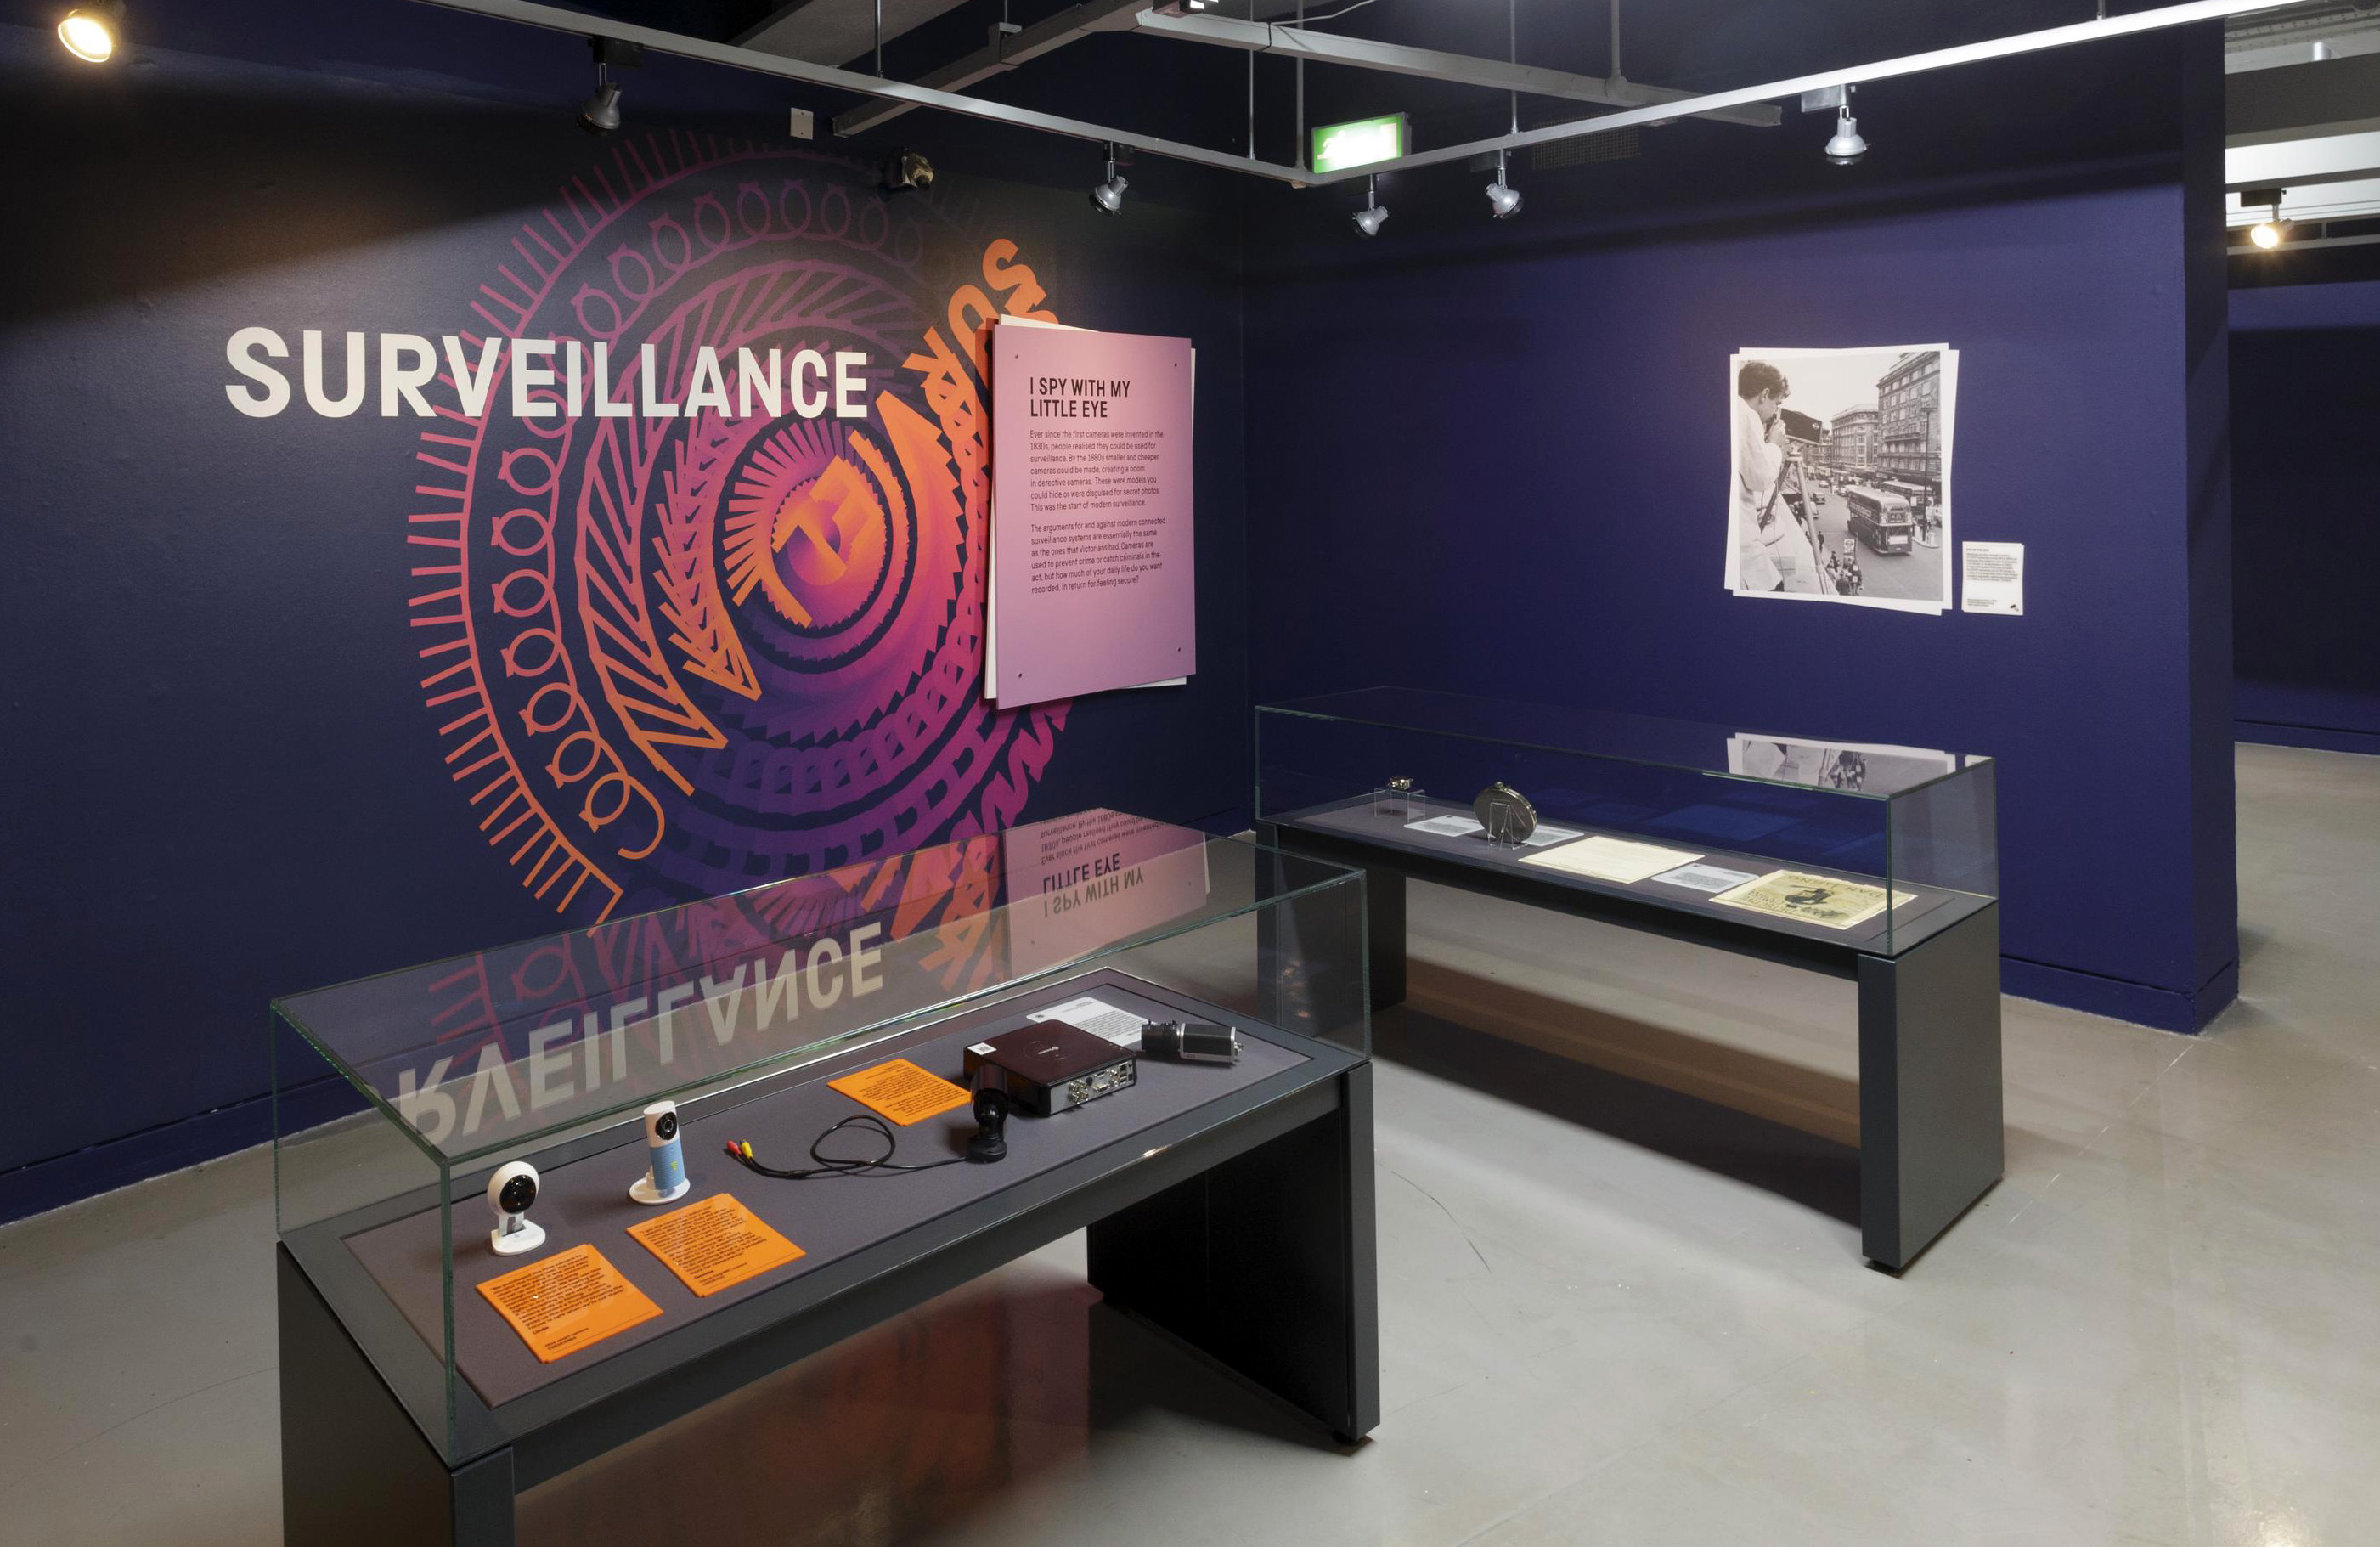 Never Alone, surveillance section, Gallery 2, National Science and Media Museum